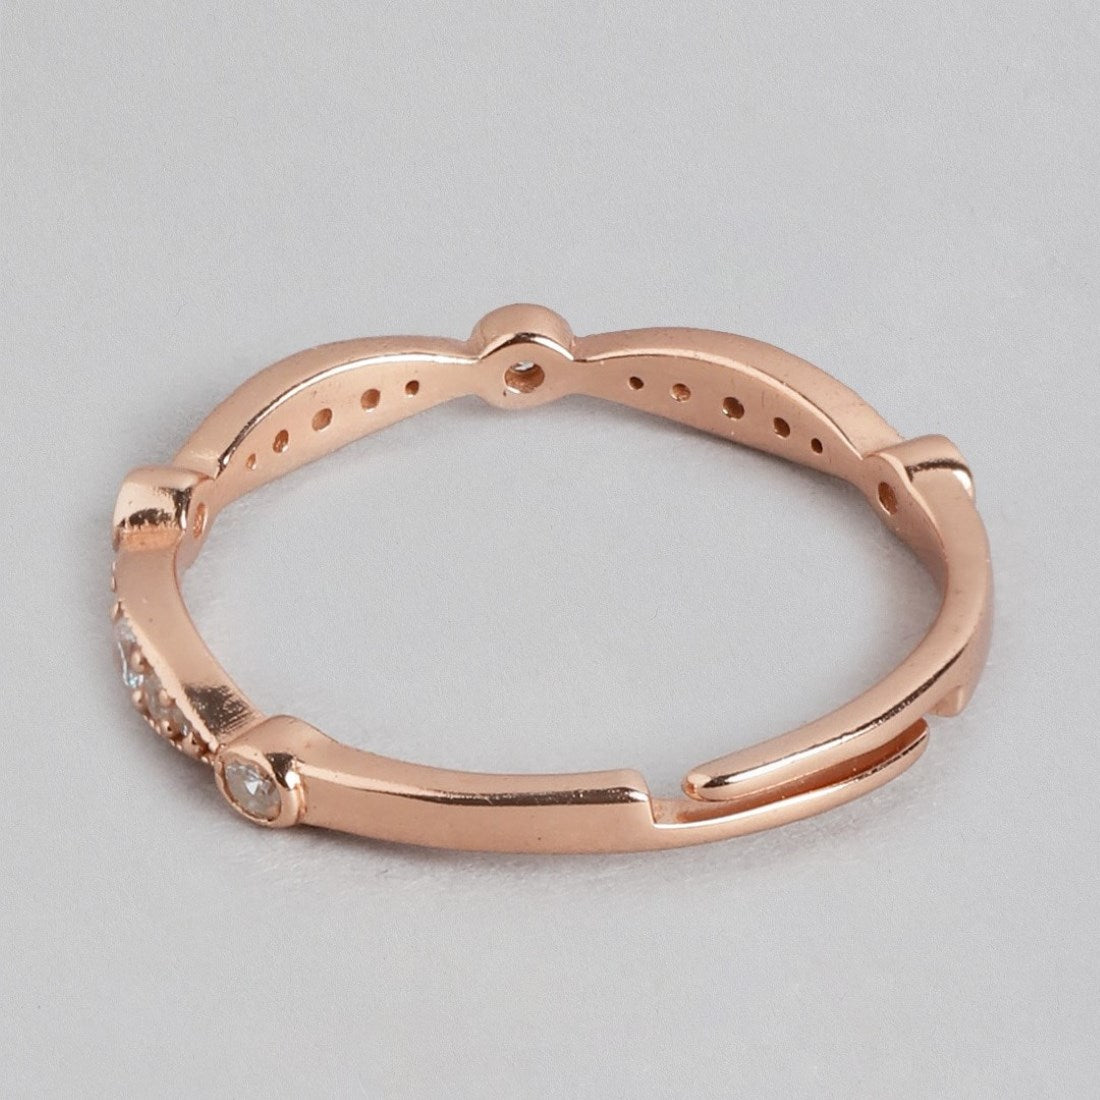 Rosy Radiance Rose Gold-Plated 925 Sterling Silver Ring for Her